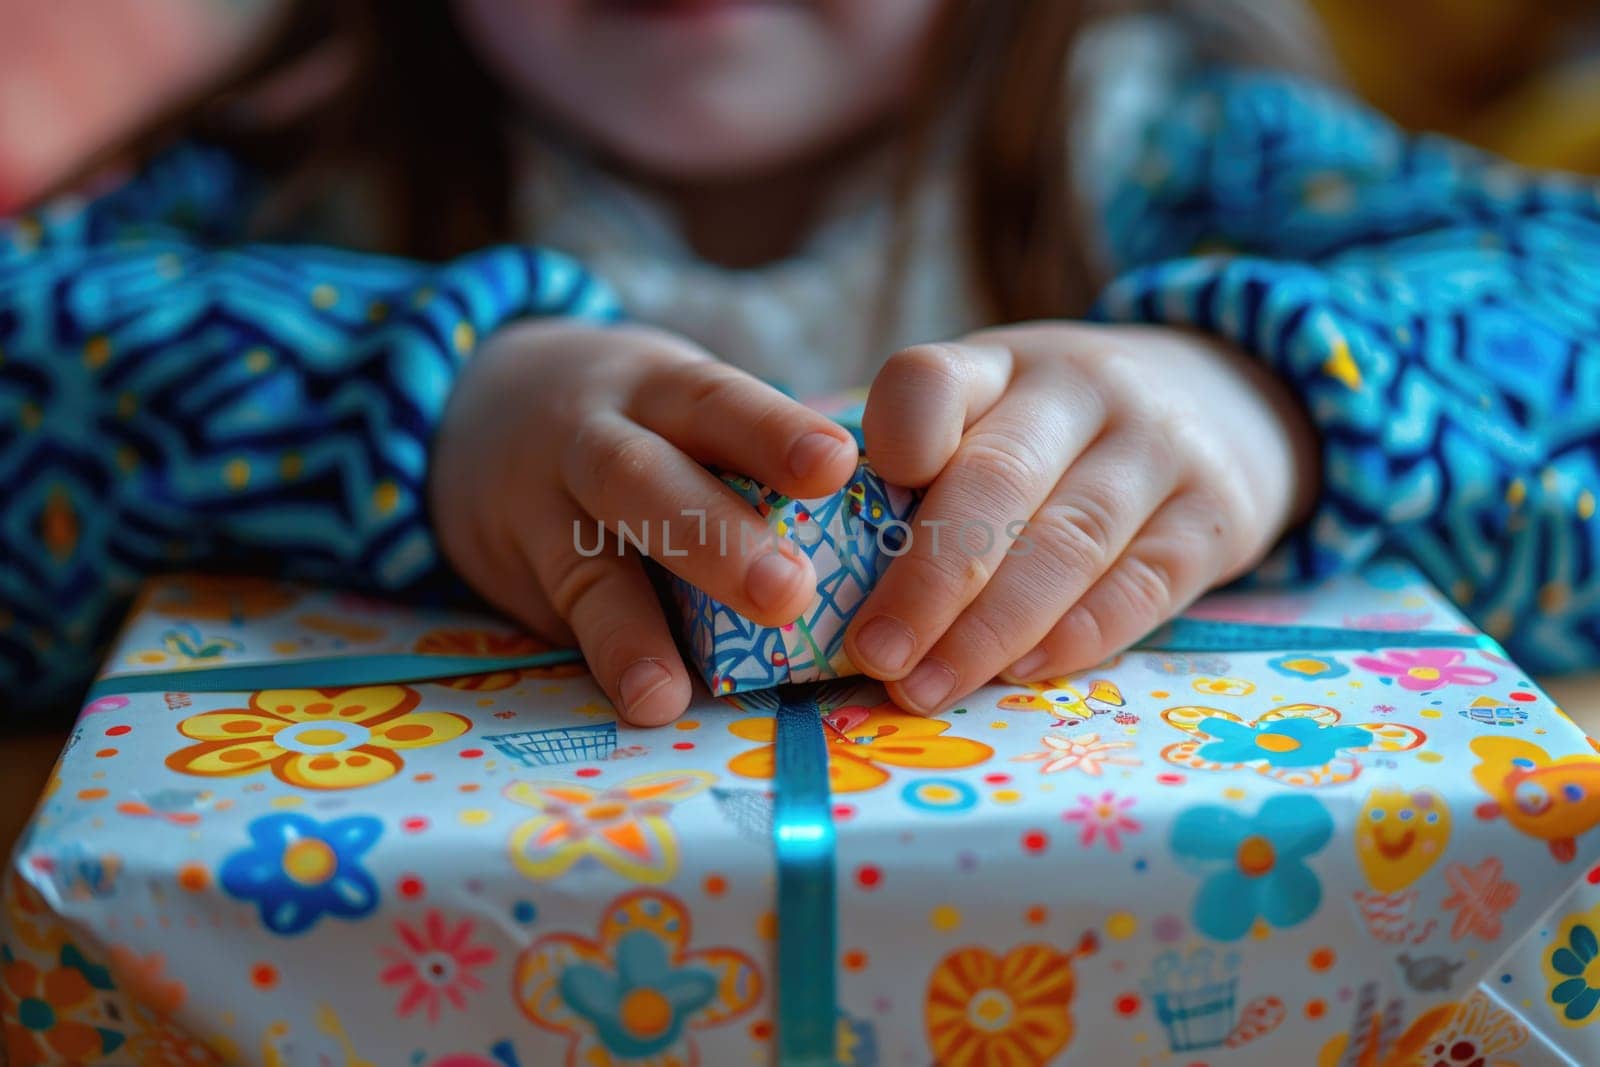 Close-up of a child's hands as they eagerly unwrap a brightly colored gift box, embodying the excitement of holidays and gift-giving.